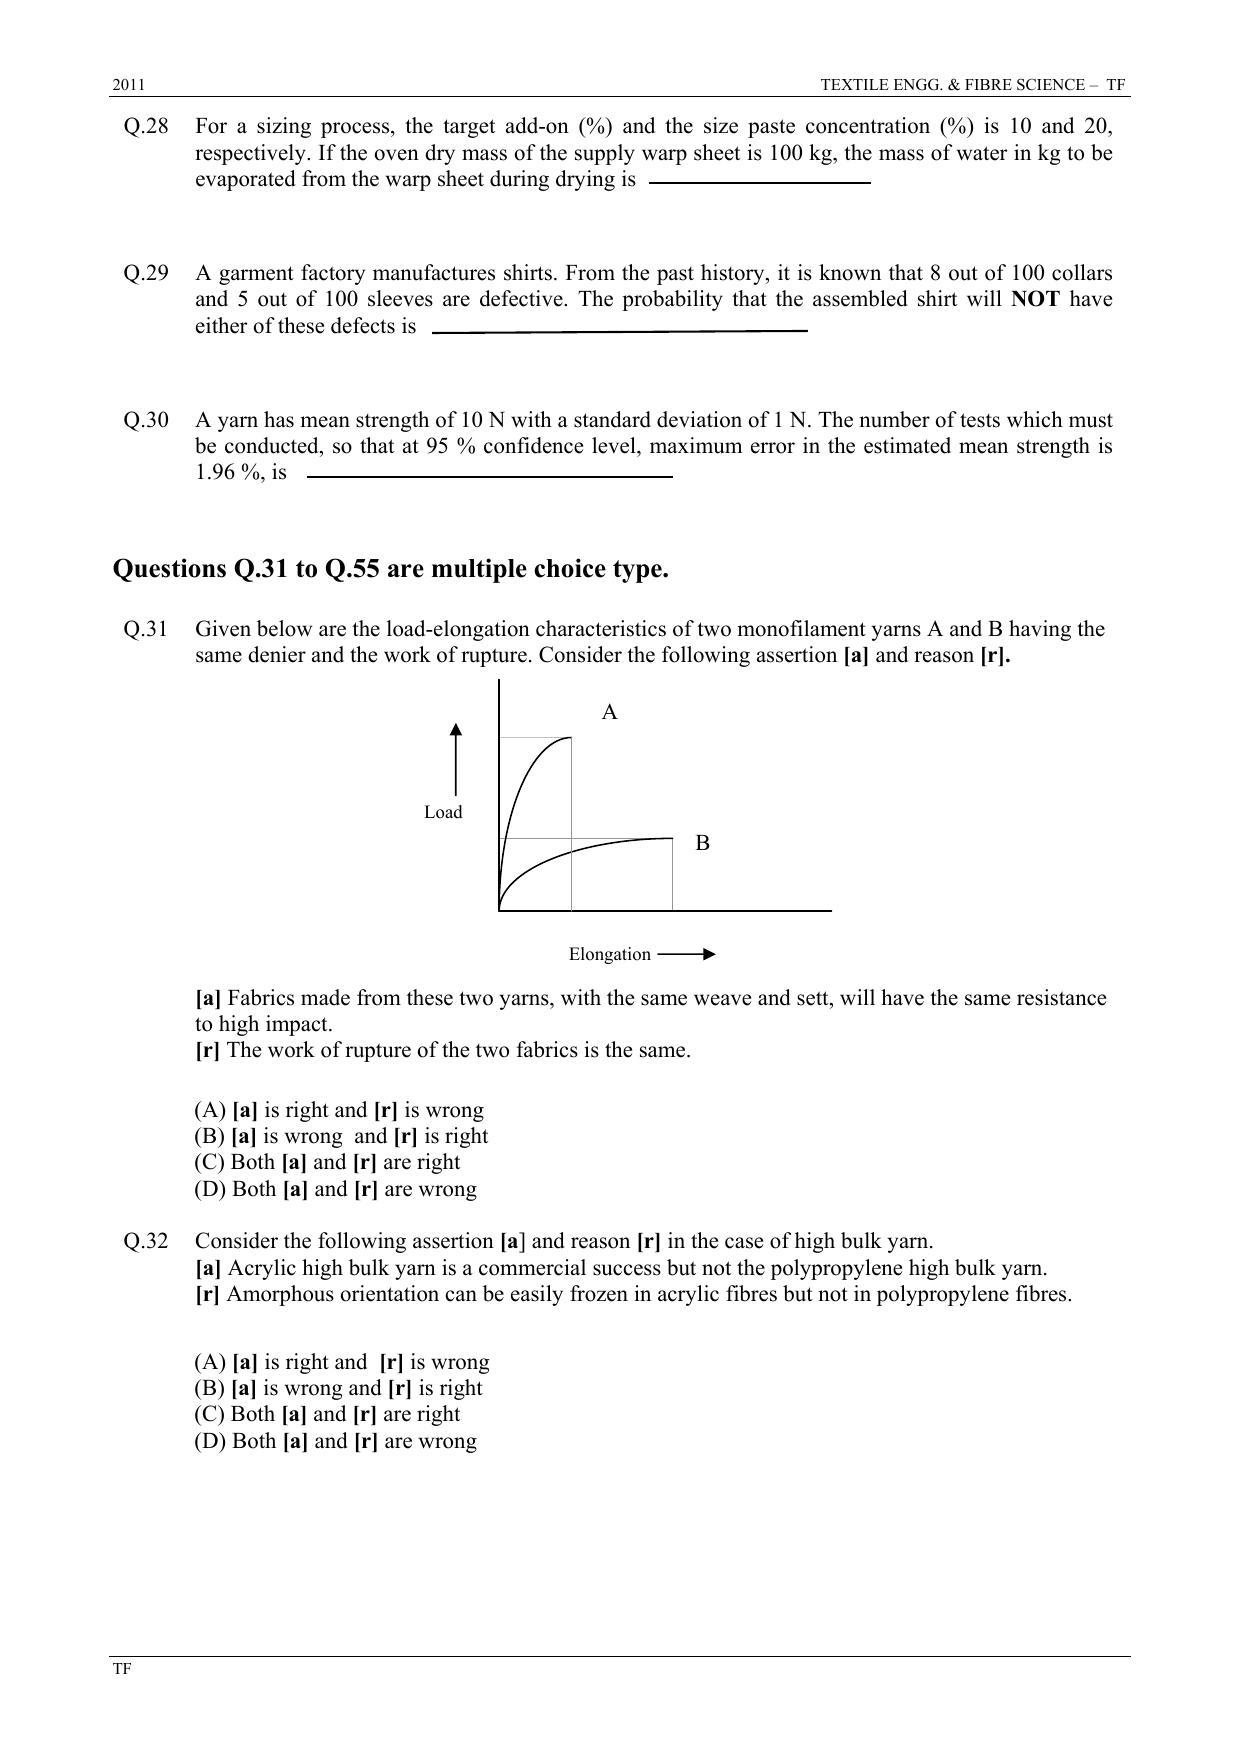 GATE 2011 Textile Engineering and Fibre Science (TF) Question Paper with Answer Key - Page 5